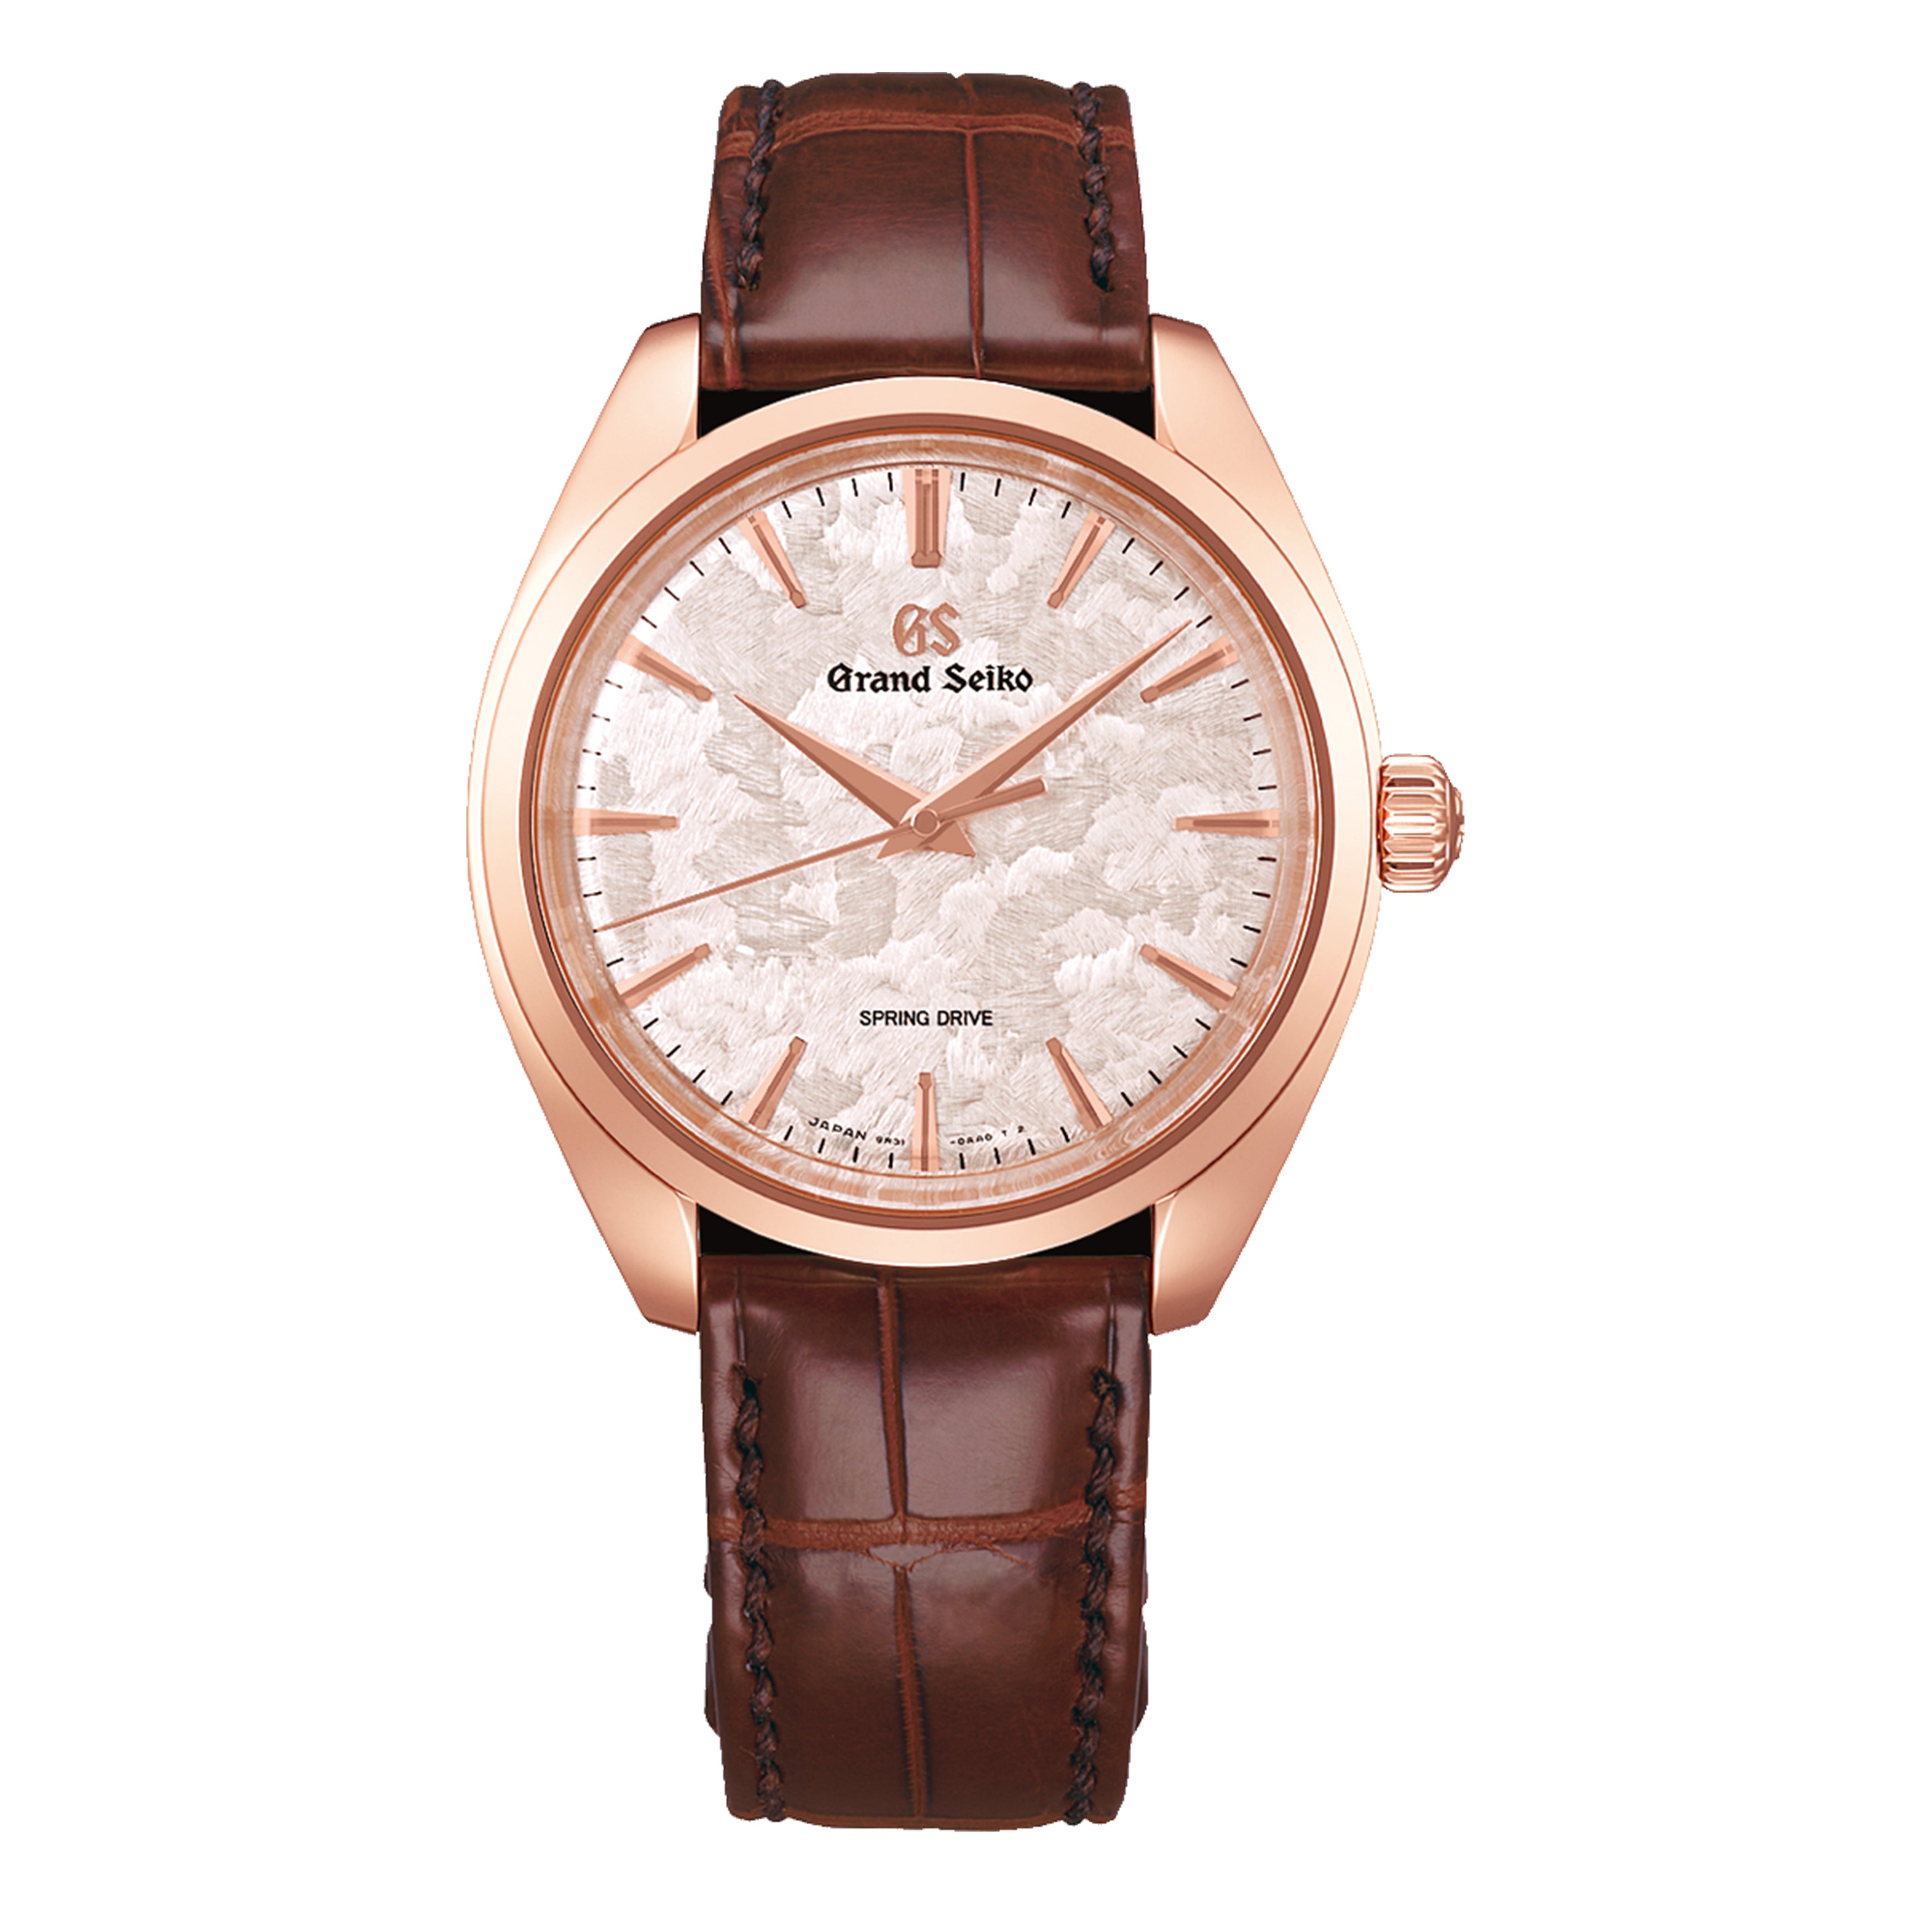 Grand Seiko Elegance Spring Drive Watch, 38.5mm Pink Dial, SBGY026